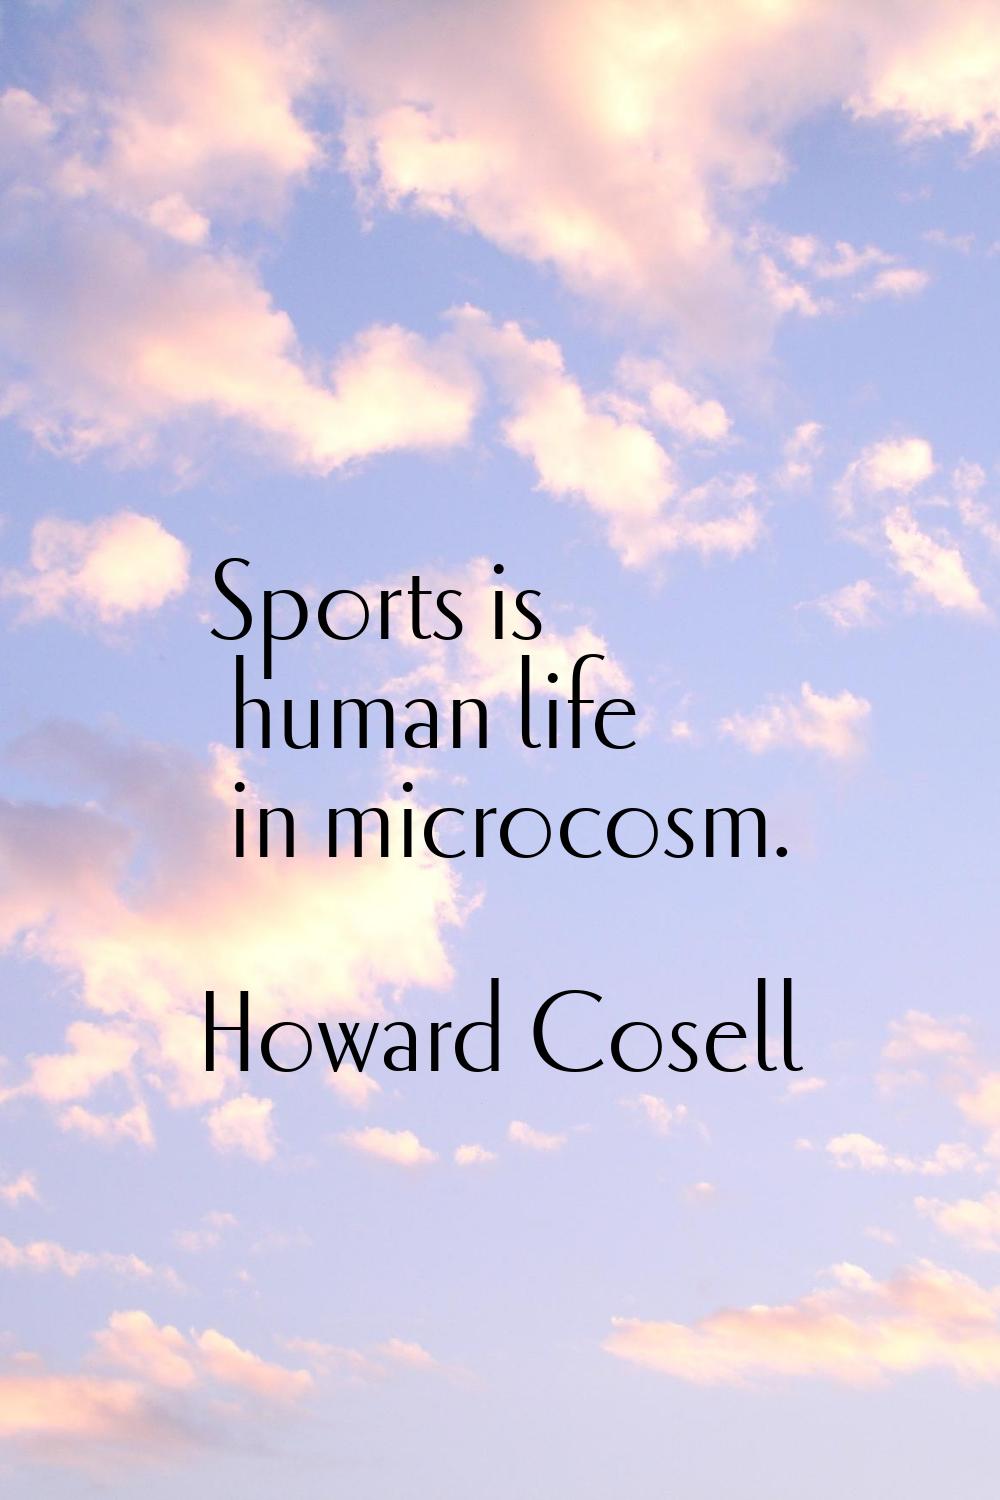 Sports is human life in microcosm.